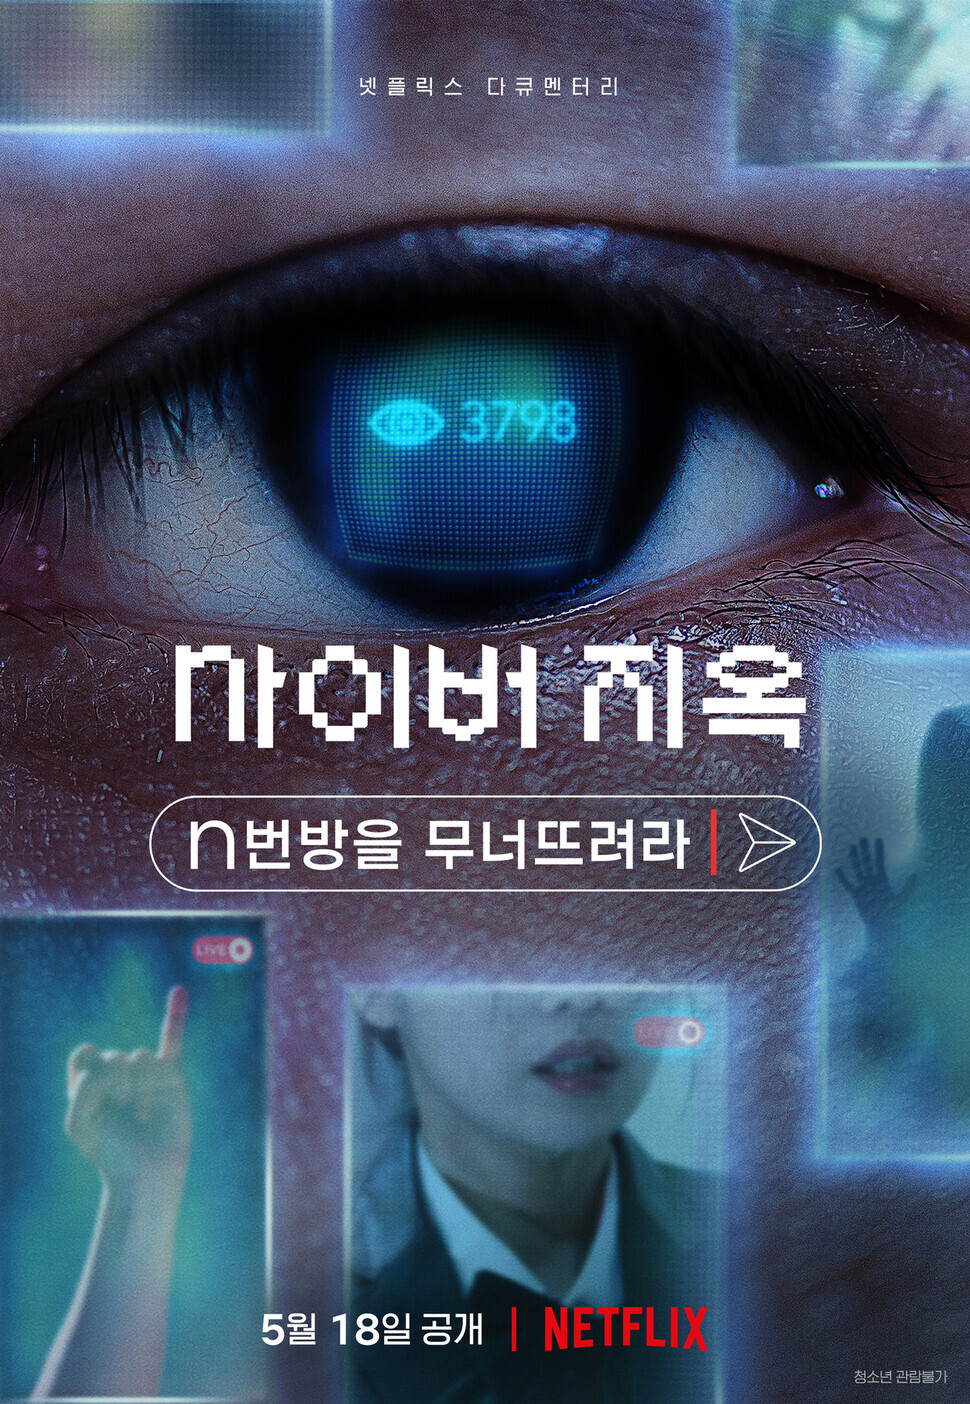 Promotional poster for “Cyber Hell: Exposing an Internet Horror,” a Netflix documentary that traces the Nth Room case that shocked Korea. (provided by Netflix)